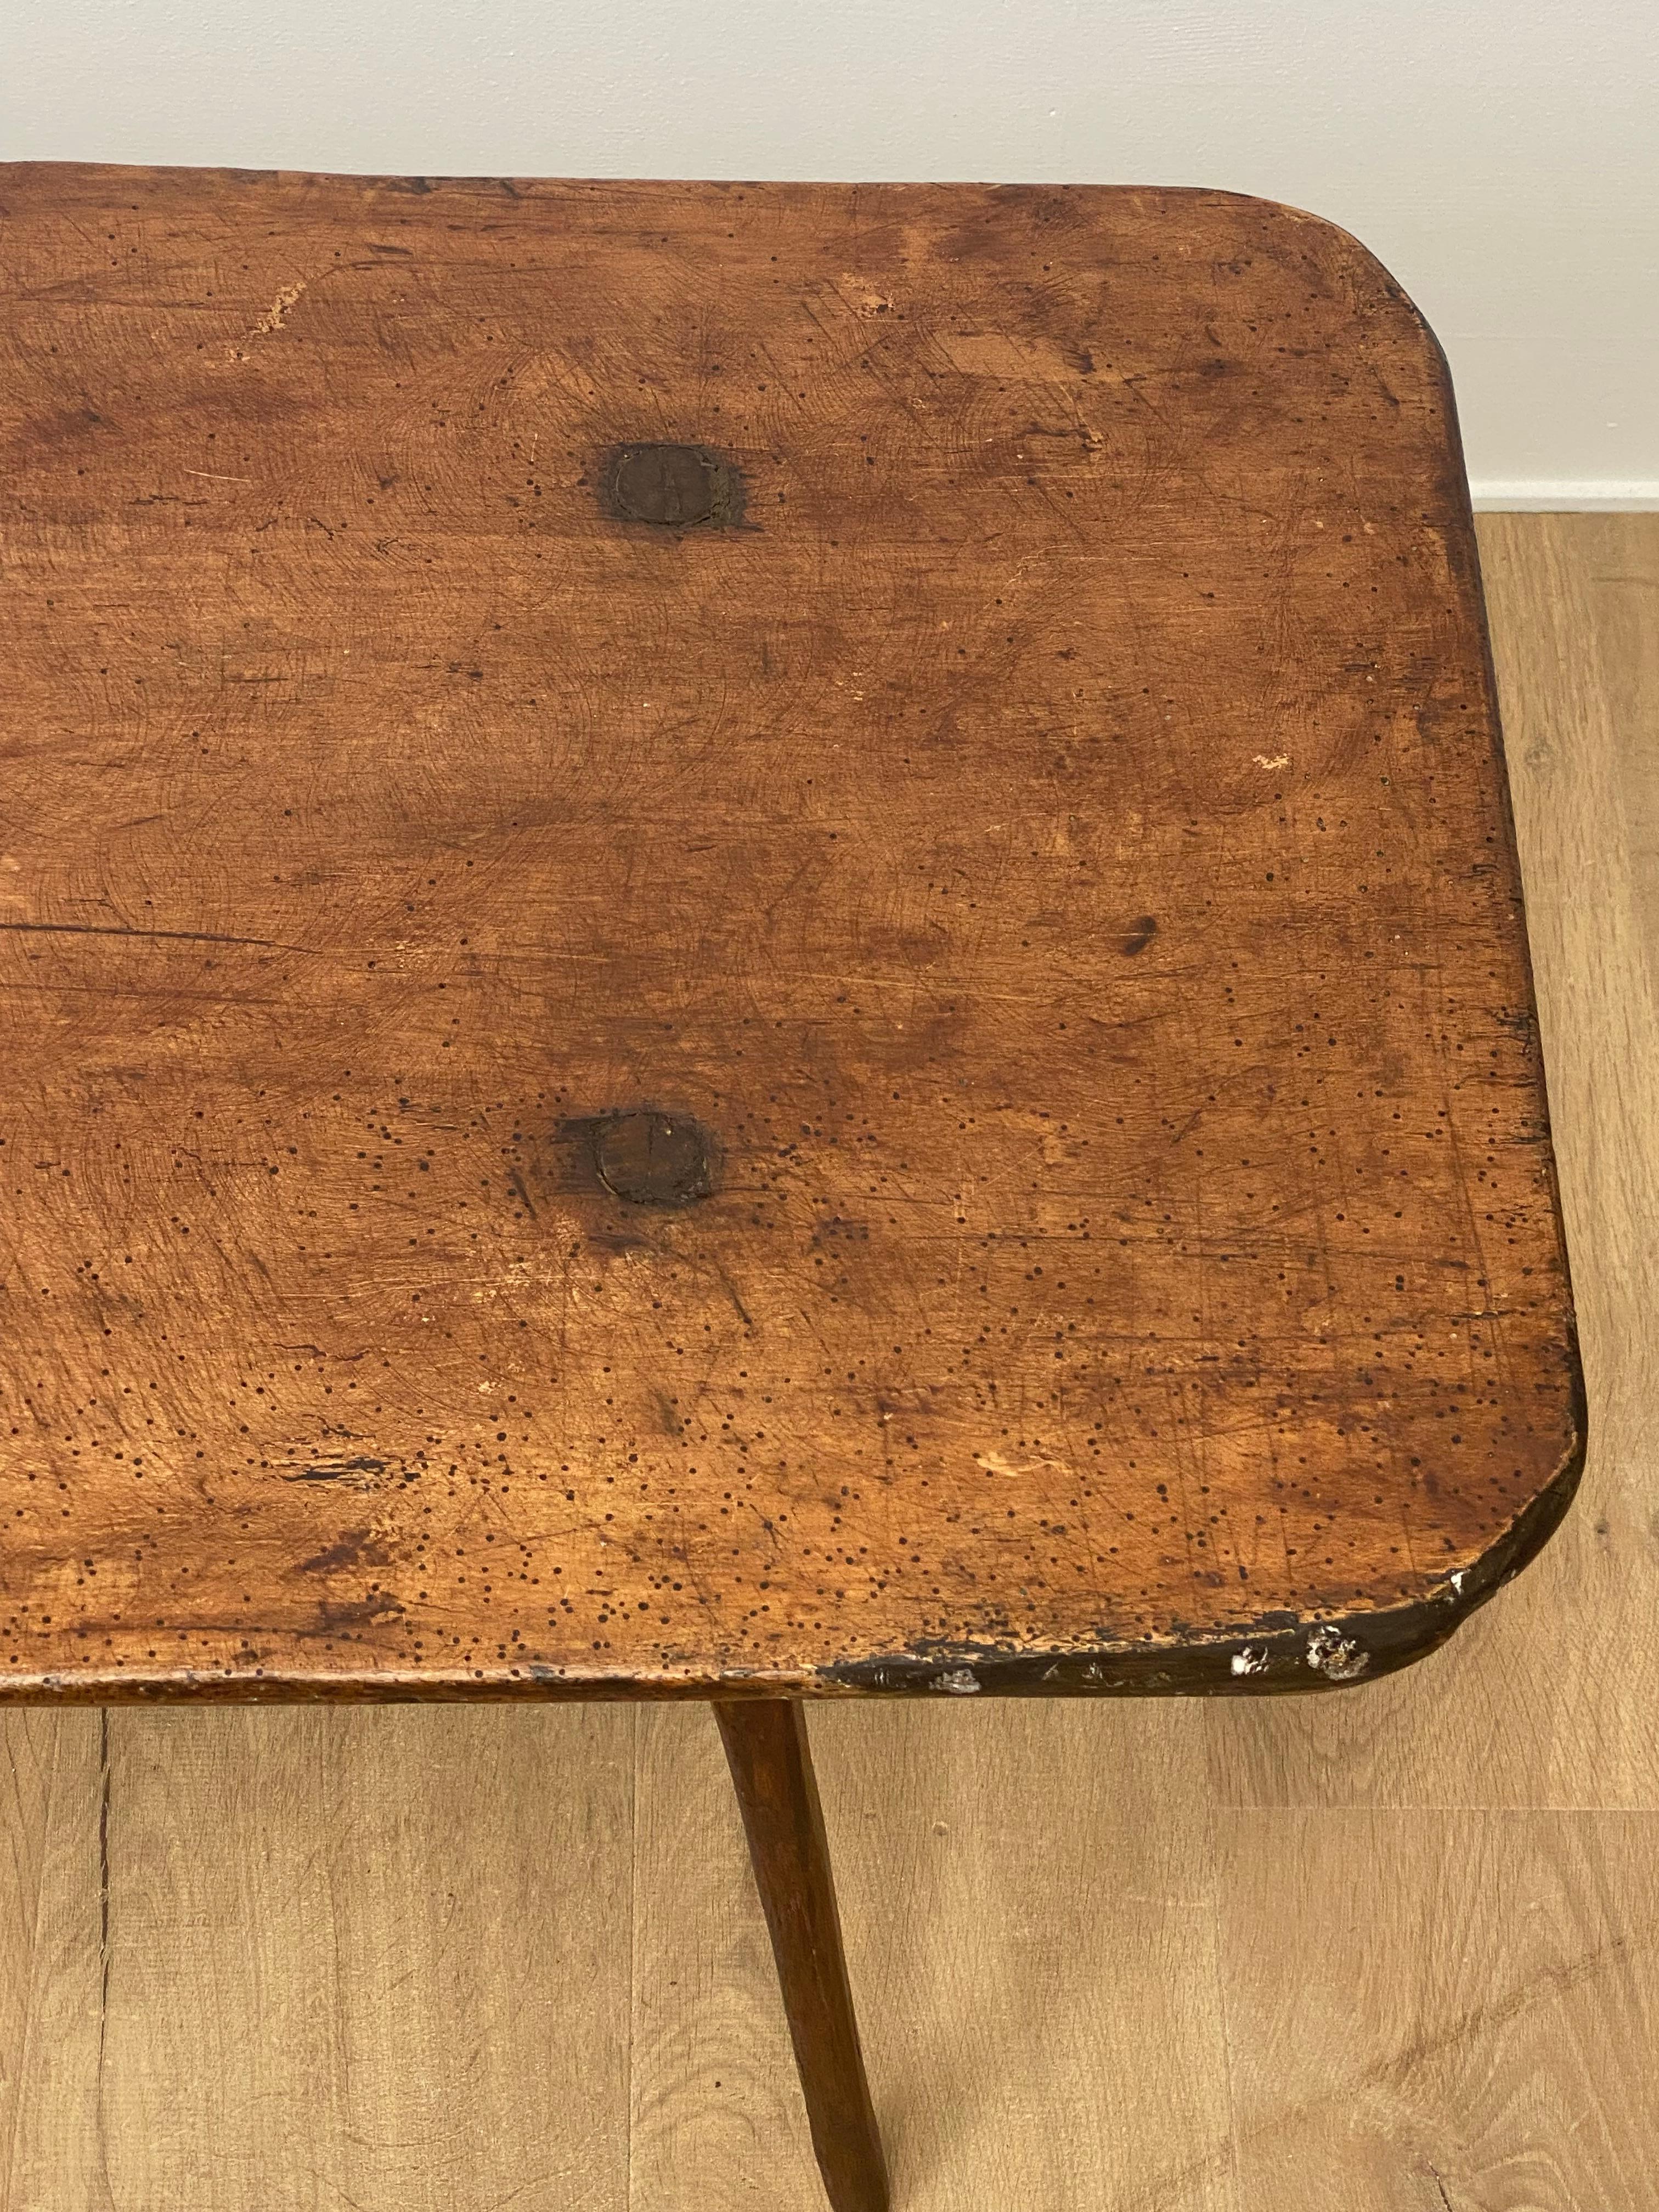 Brutalist Antique Italian small Farmers Table with rounded corners,
standing on 4 elegant feet,
great shine and patina of the Fruitwood,
to be used for different purposes